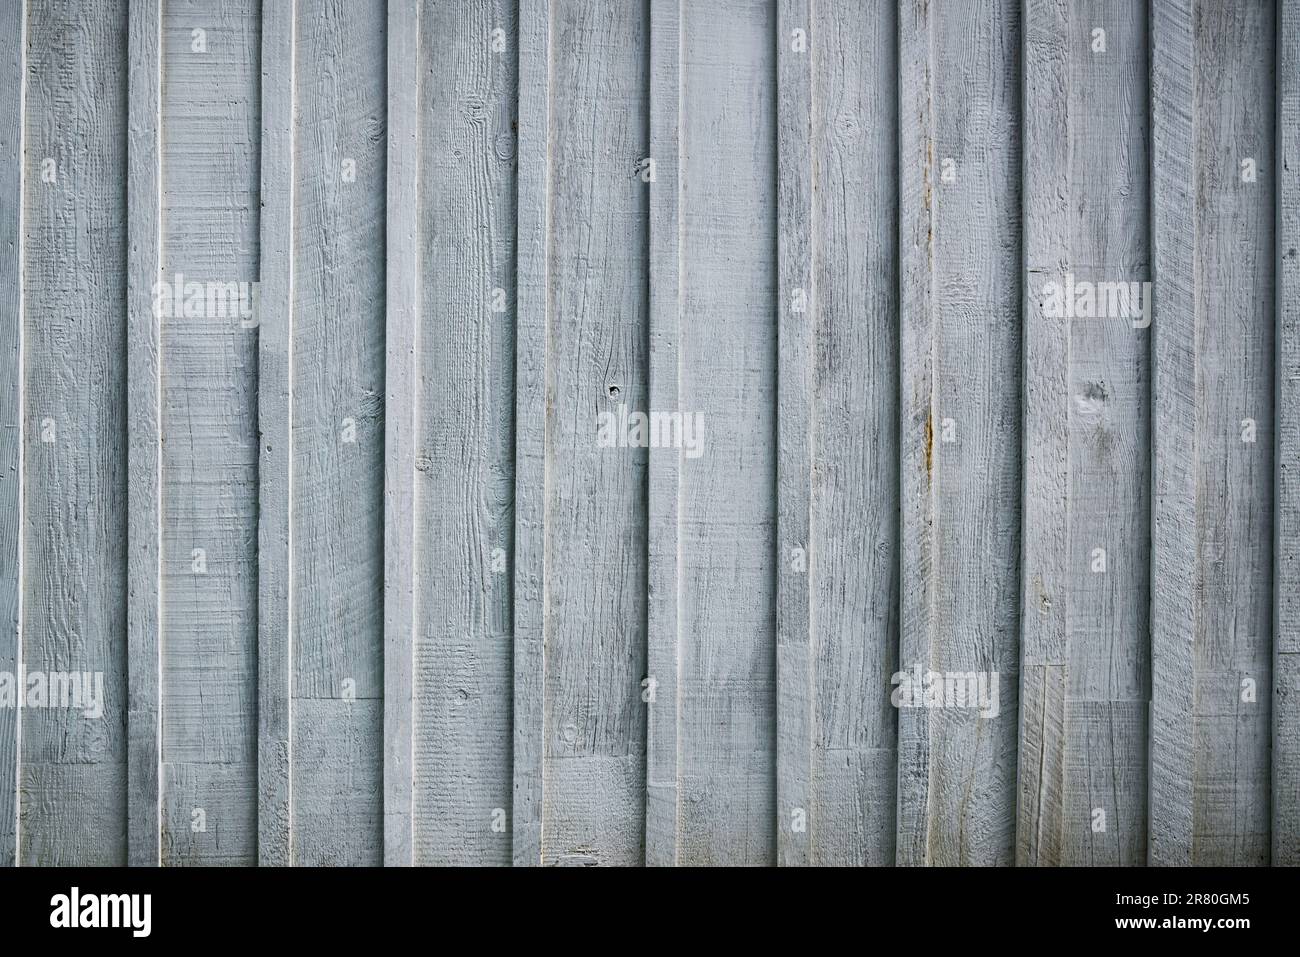 Rustic gray vertical wood plank  wall background Stock Photo